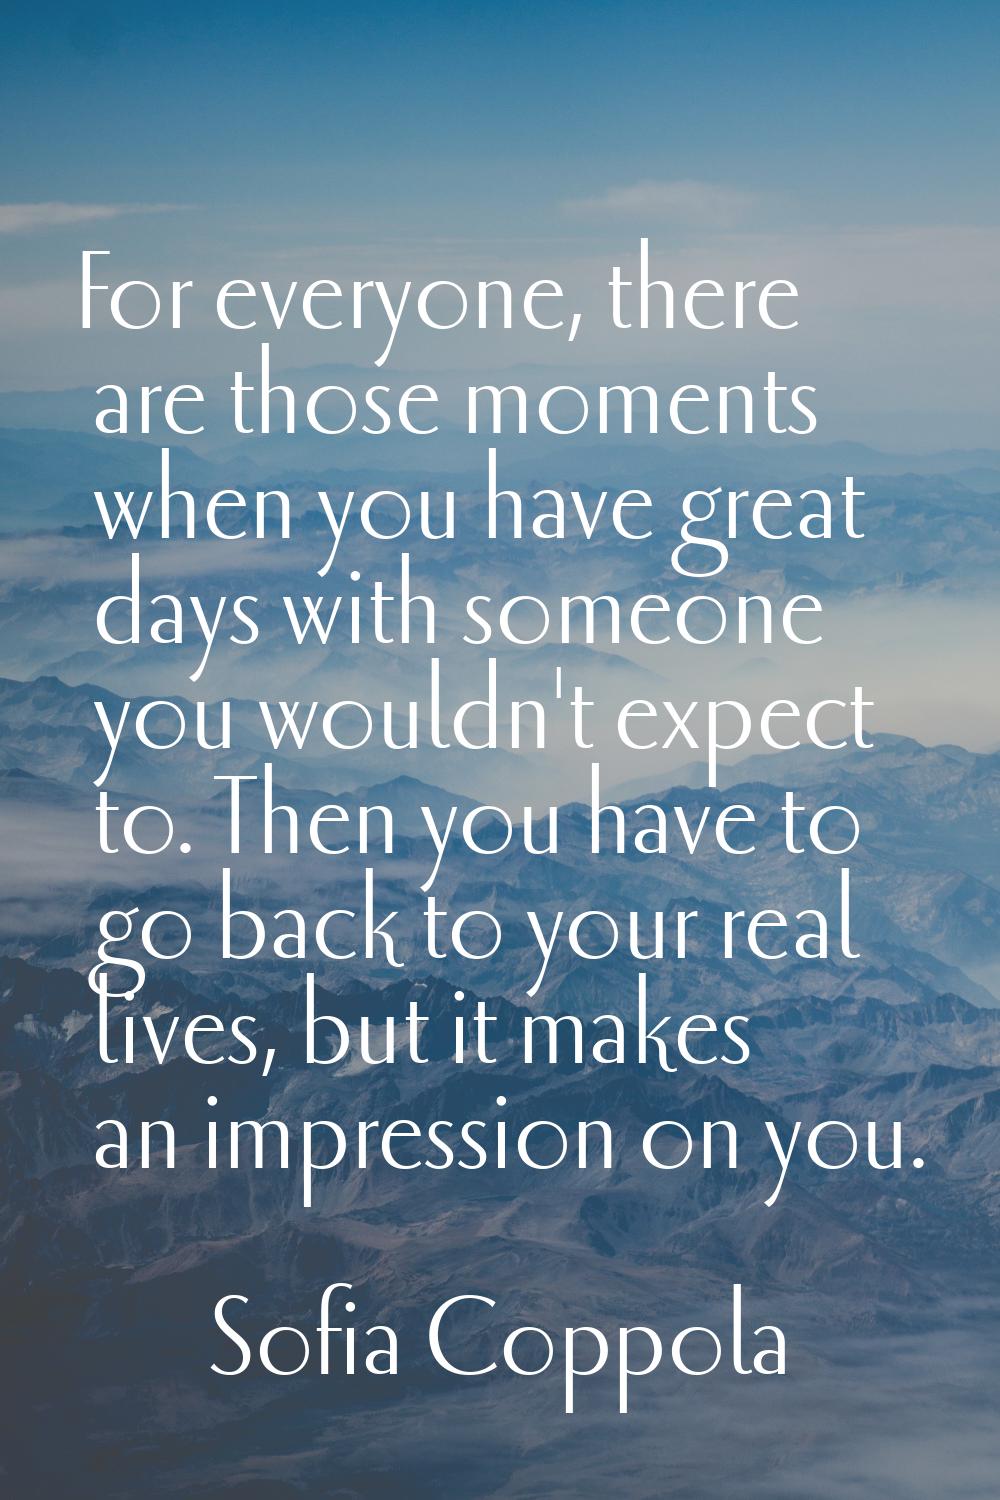 For everyone, there are those moments when you have great days with someone you wouldn't expect to.